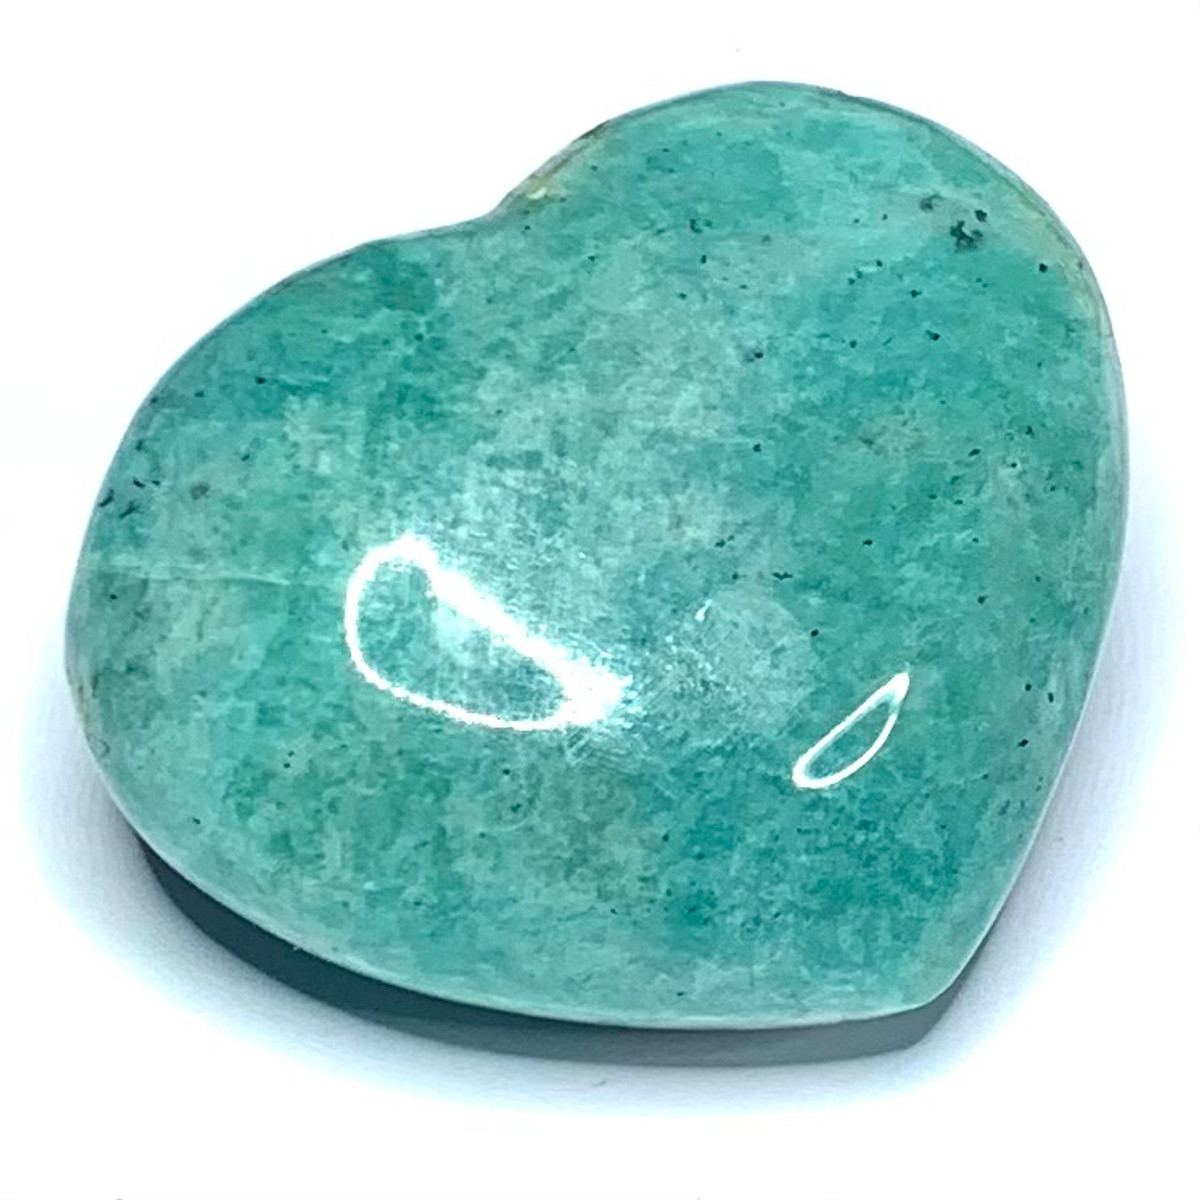 One of a Kind Amazonite Carved Heart Palm Stone-1 3/4 x 1 1/2" (NC4694)
